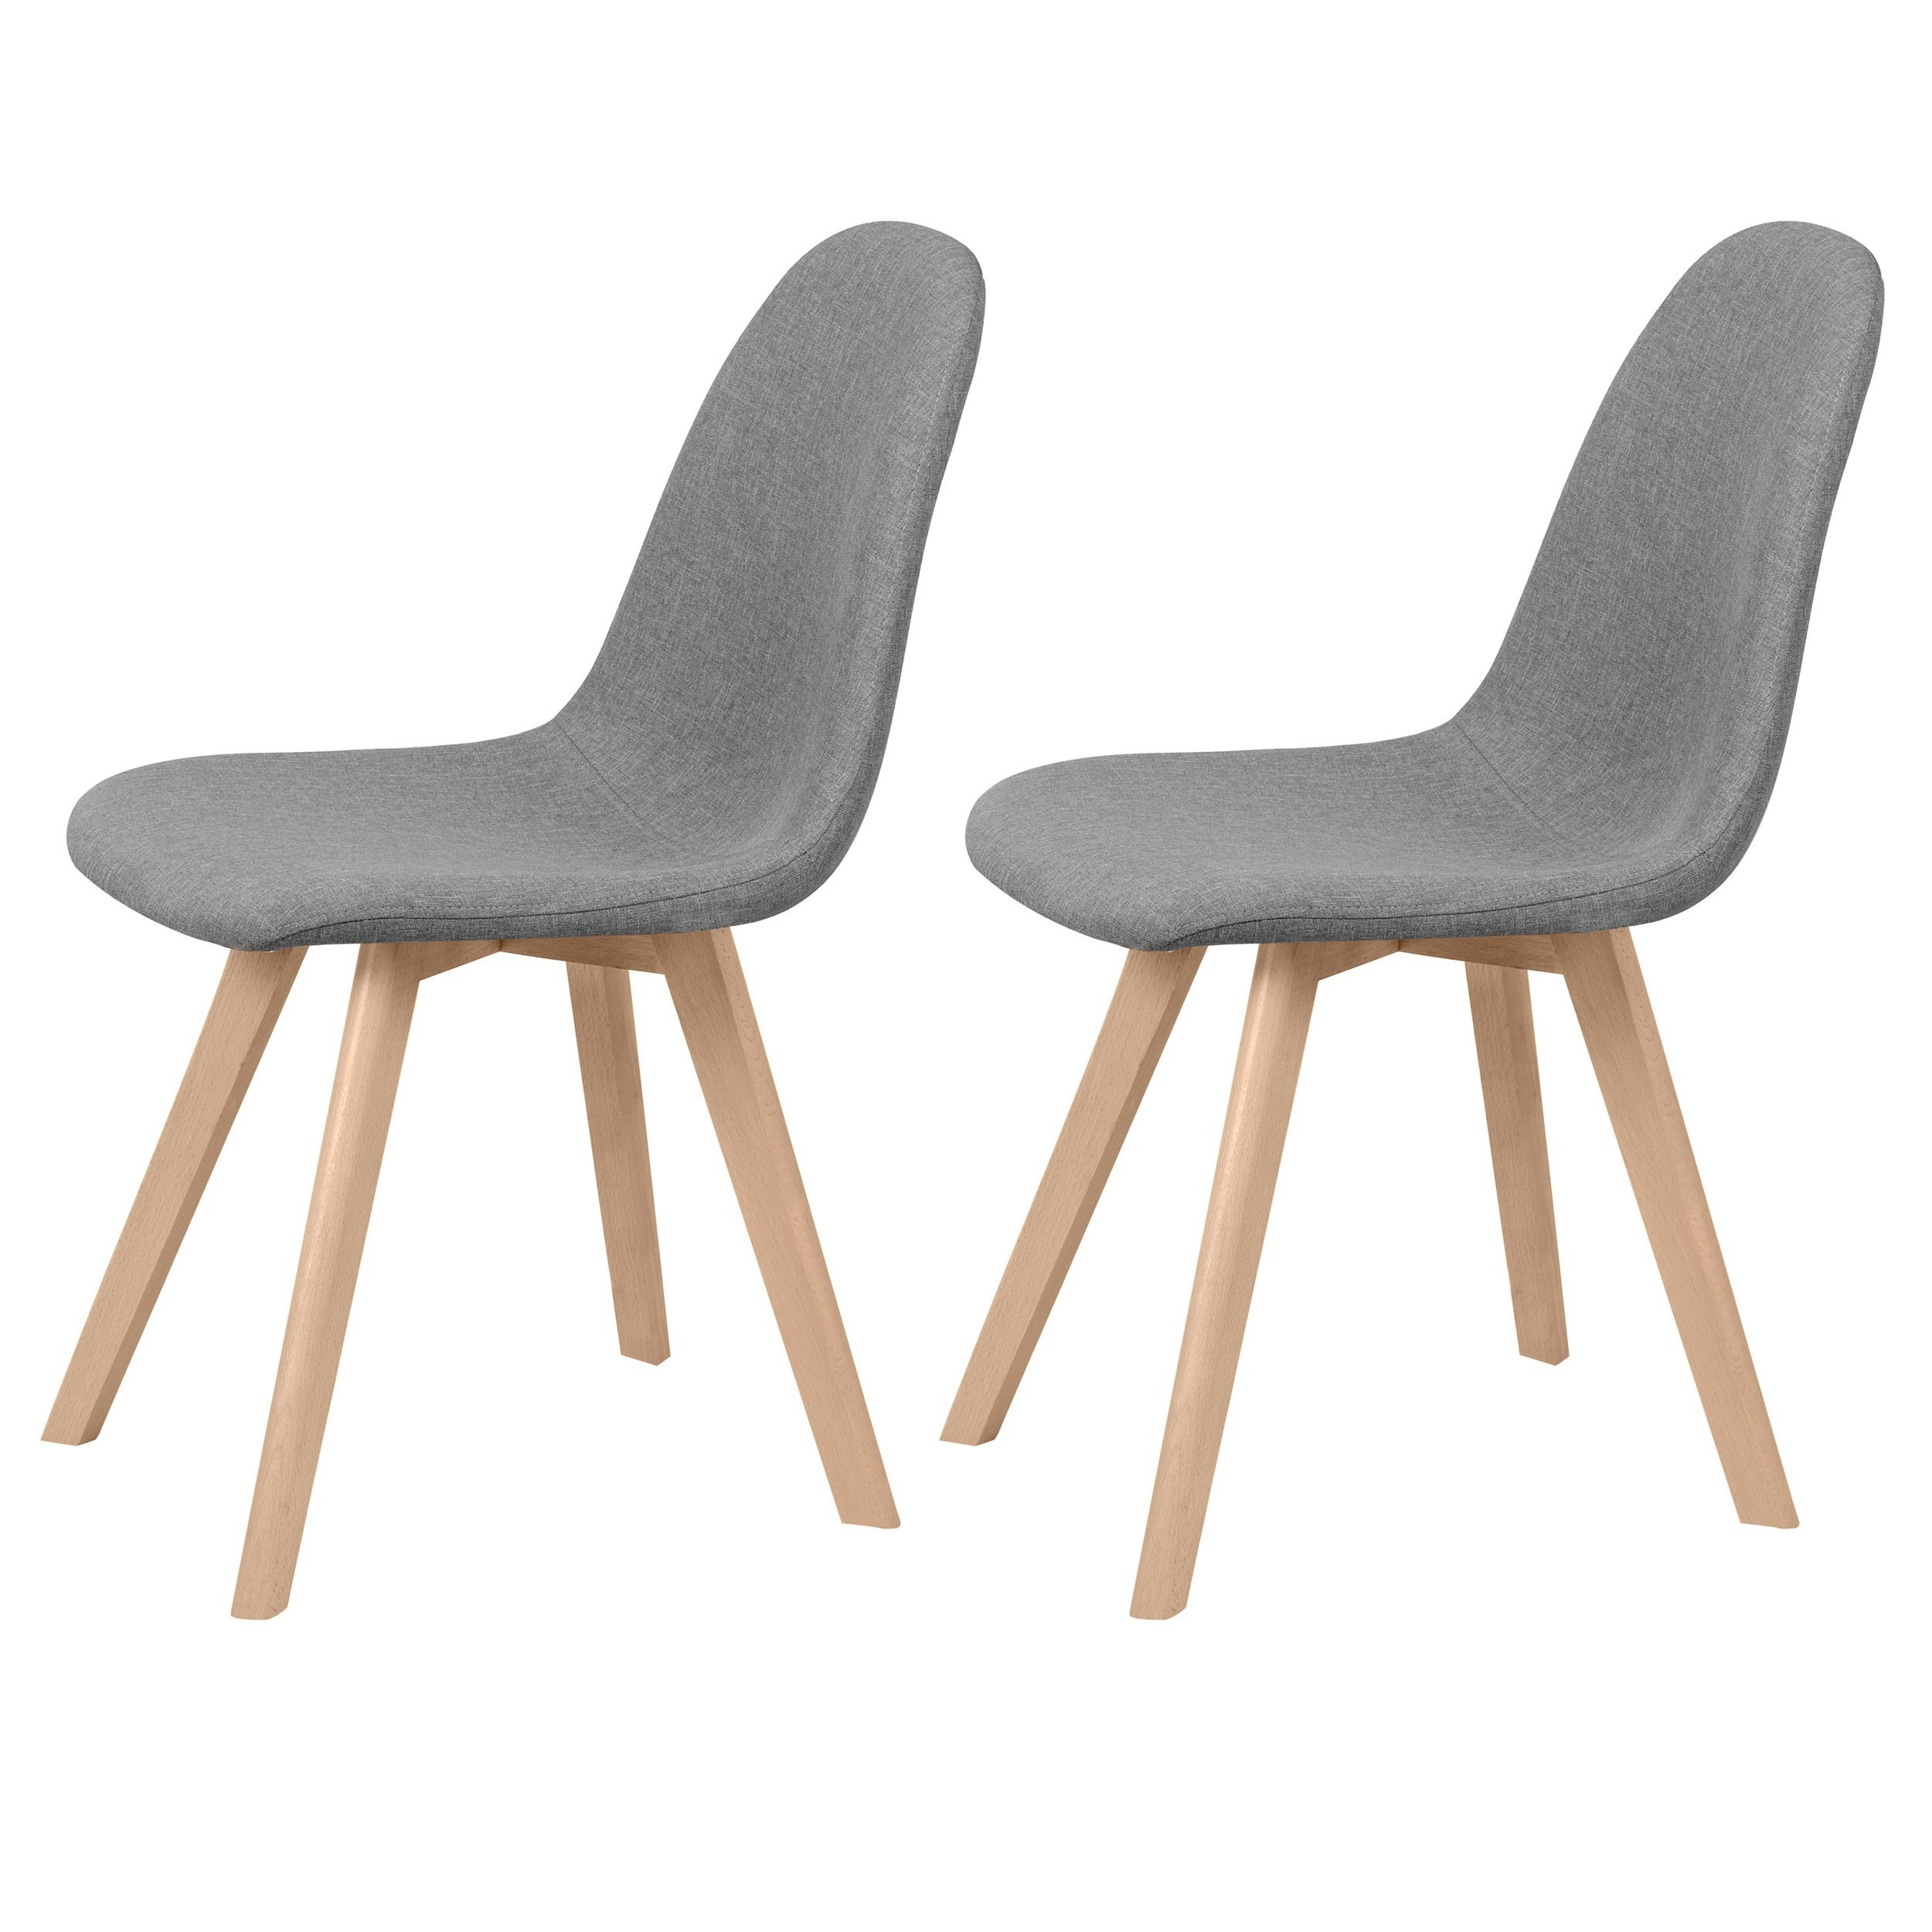 Recouvrir une chaise scandinave